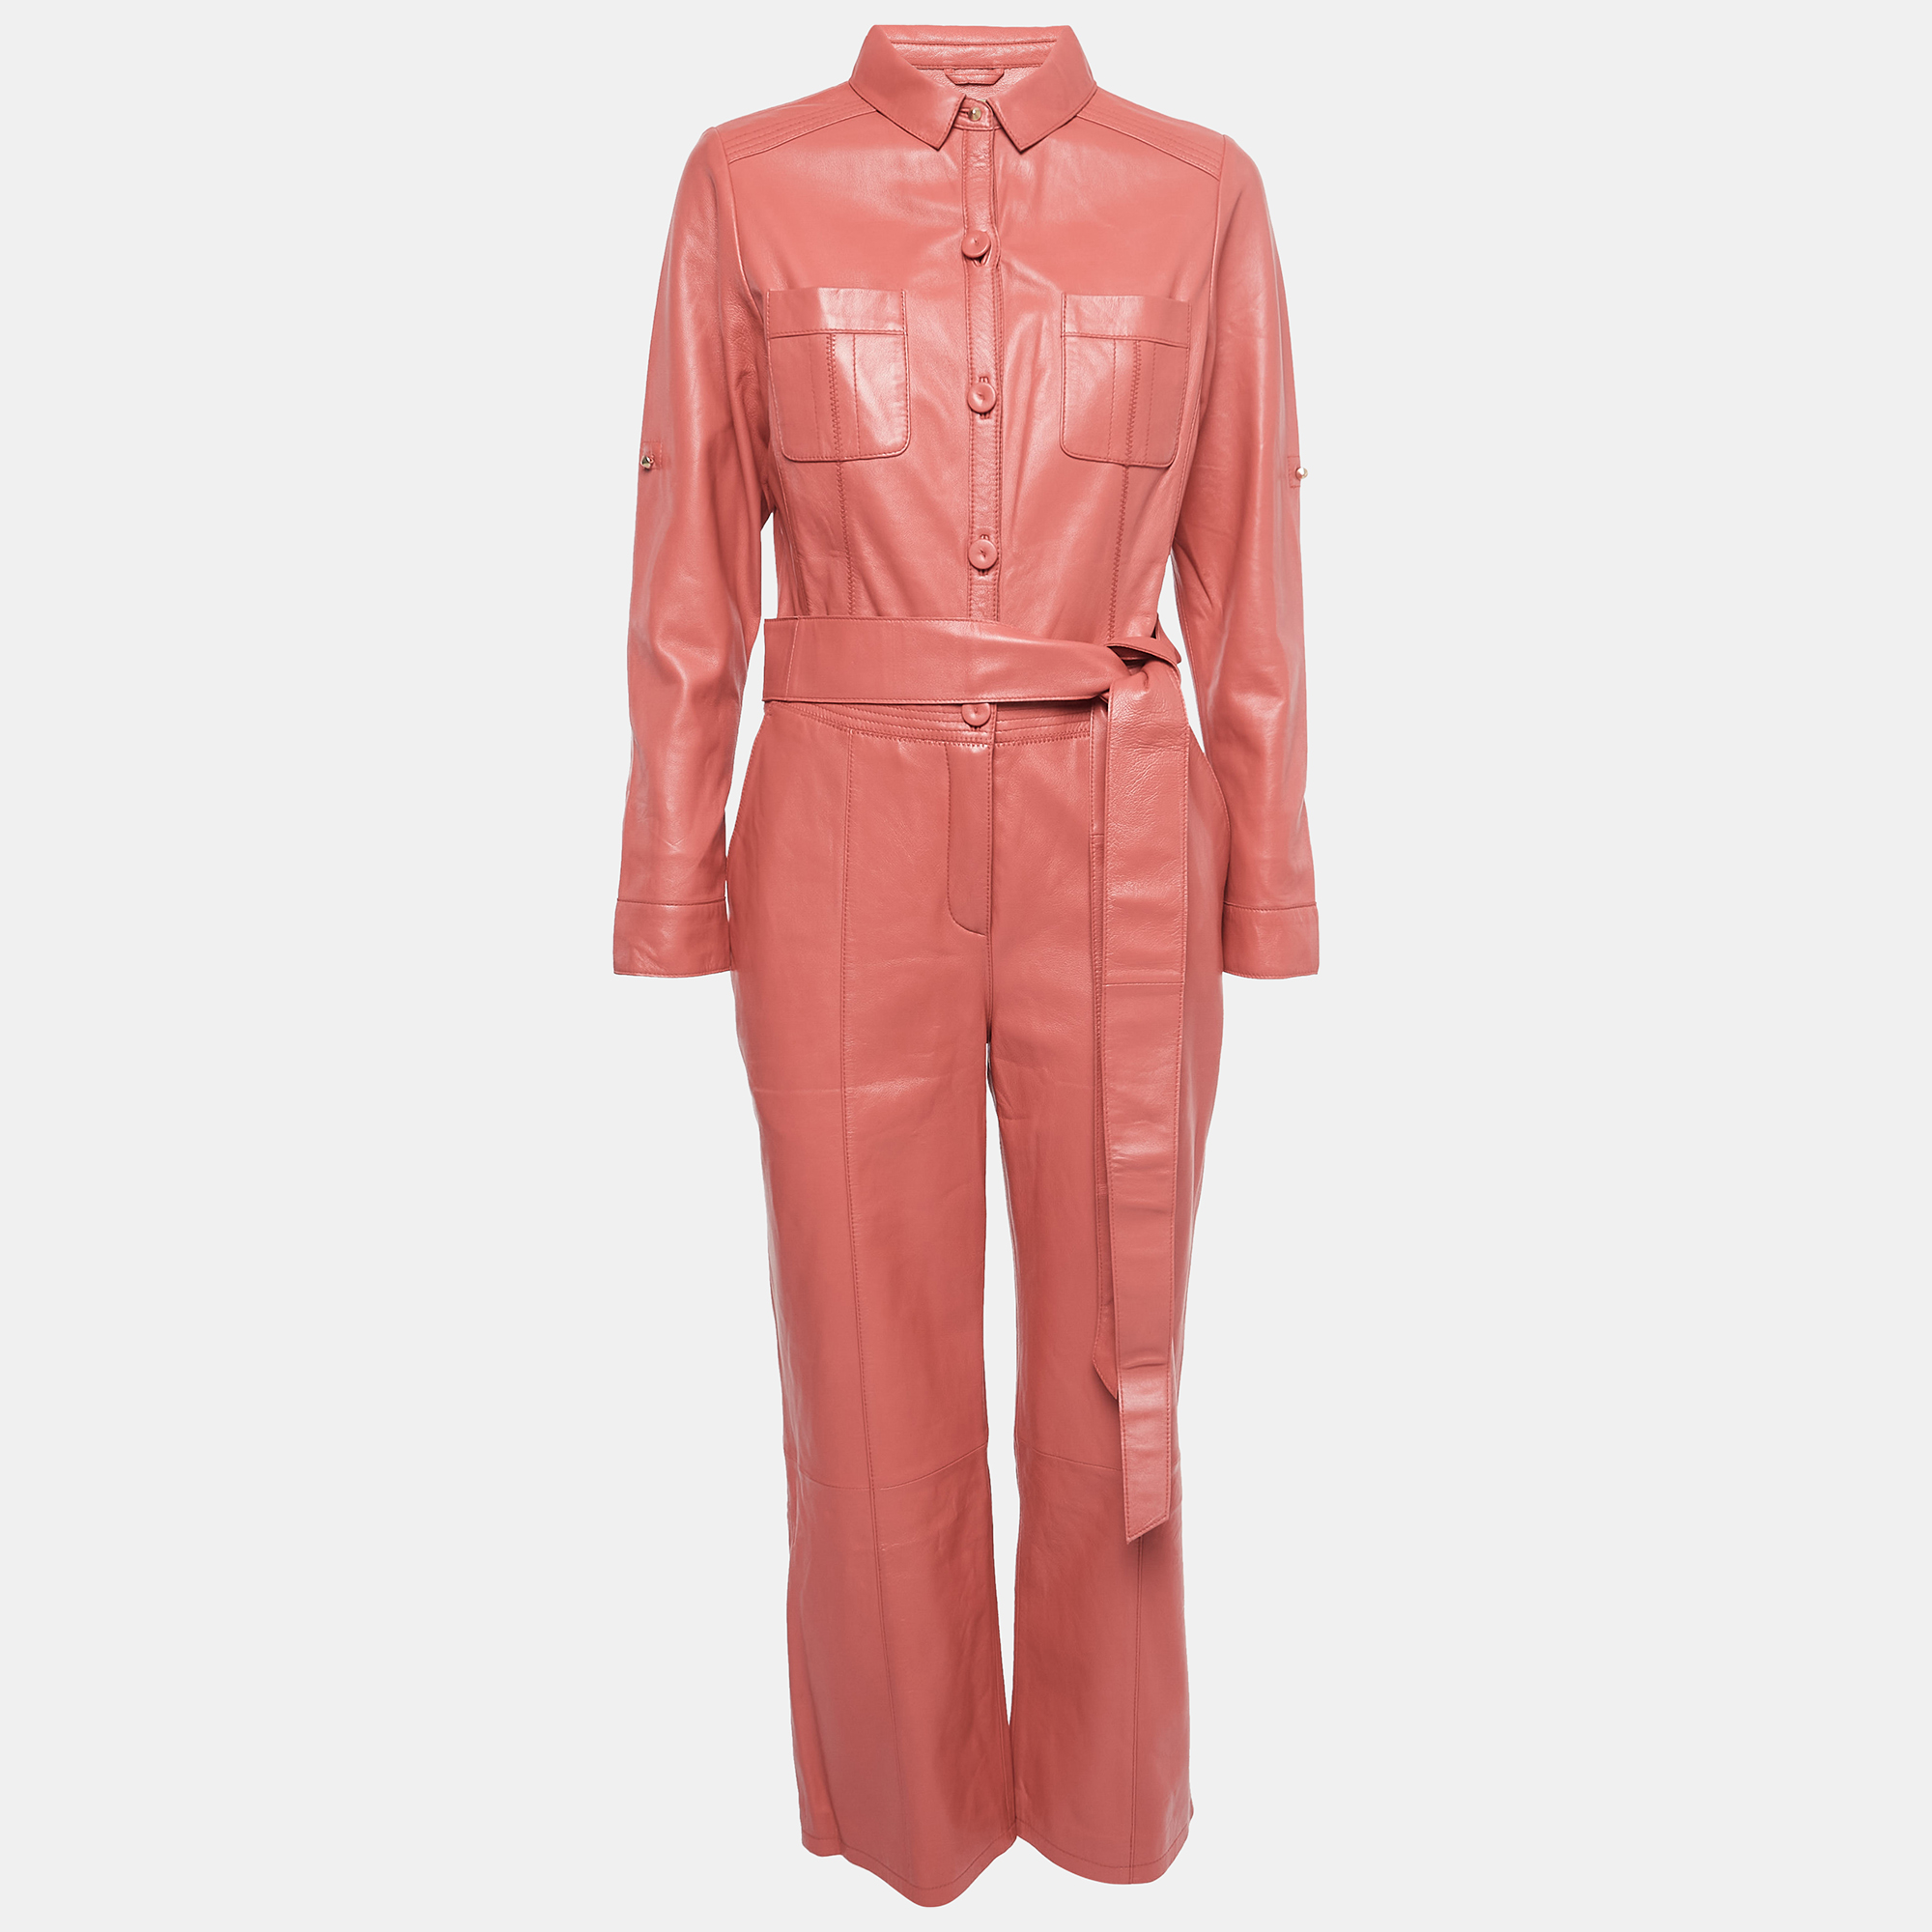 Richard radcliffe richards radcliffe pink leather belted cropped jumpsuit m